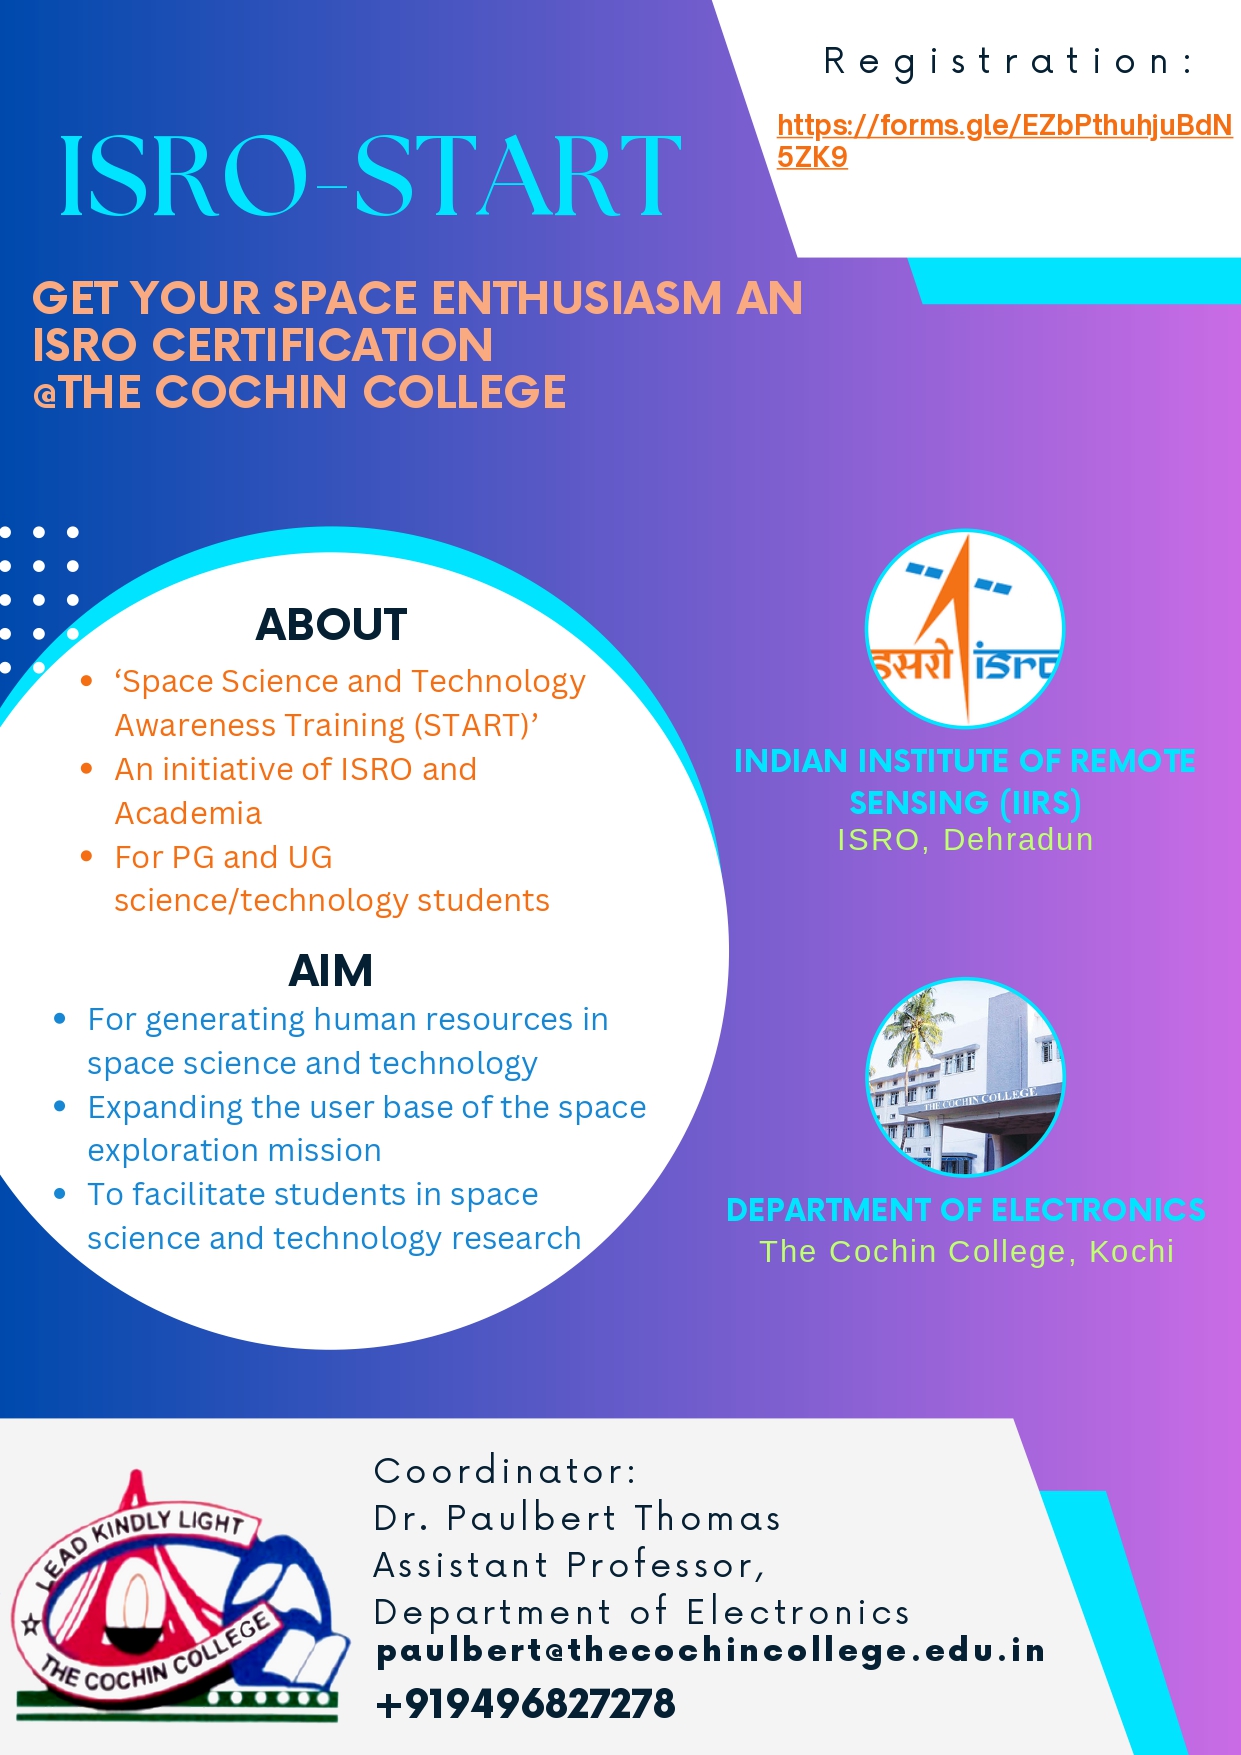 ISRO-START GET YOUR SPACE ENTHUSIASM AN ISRO CERTIFICATION @THE COCHIN COLLEGE